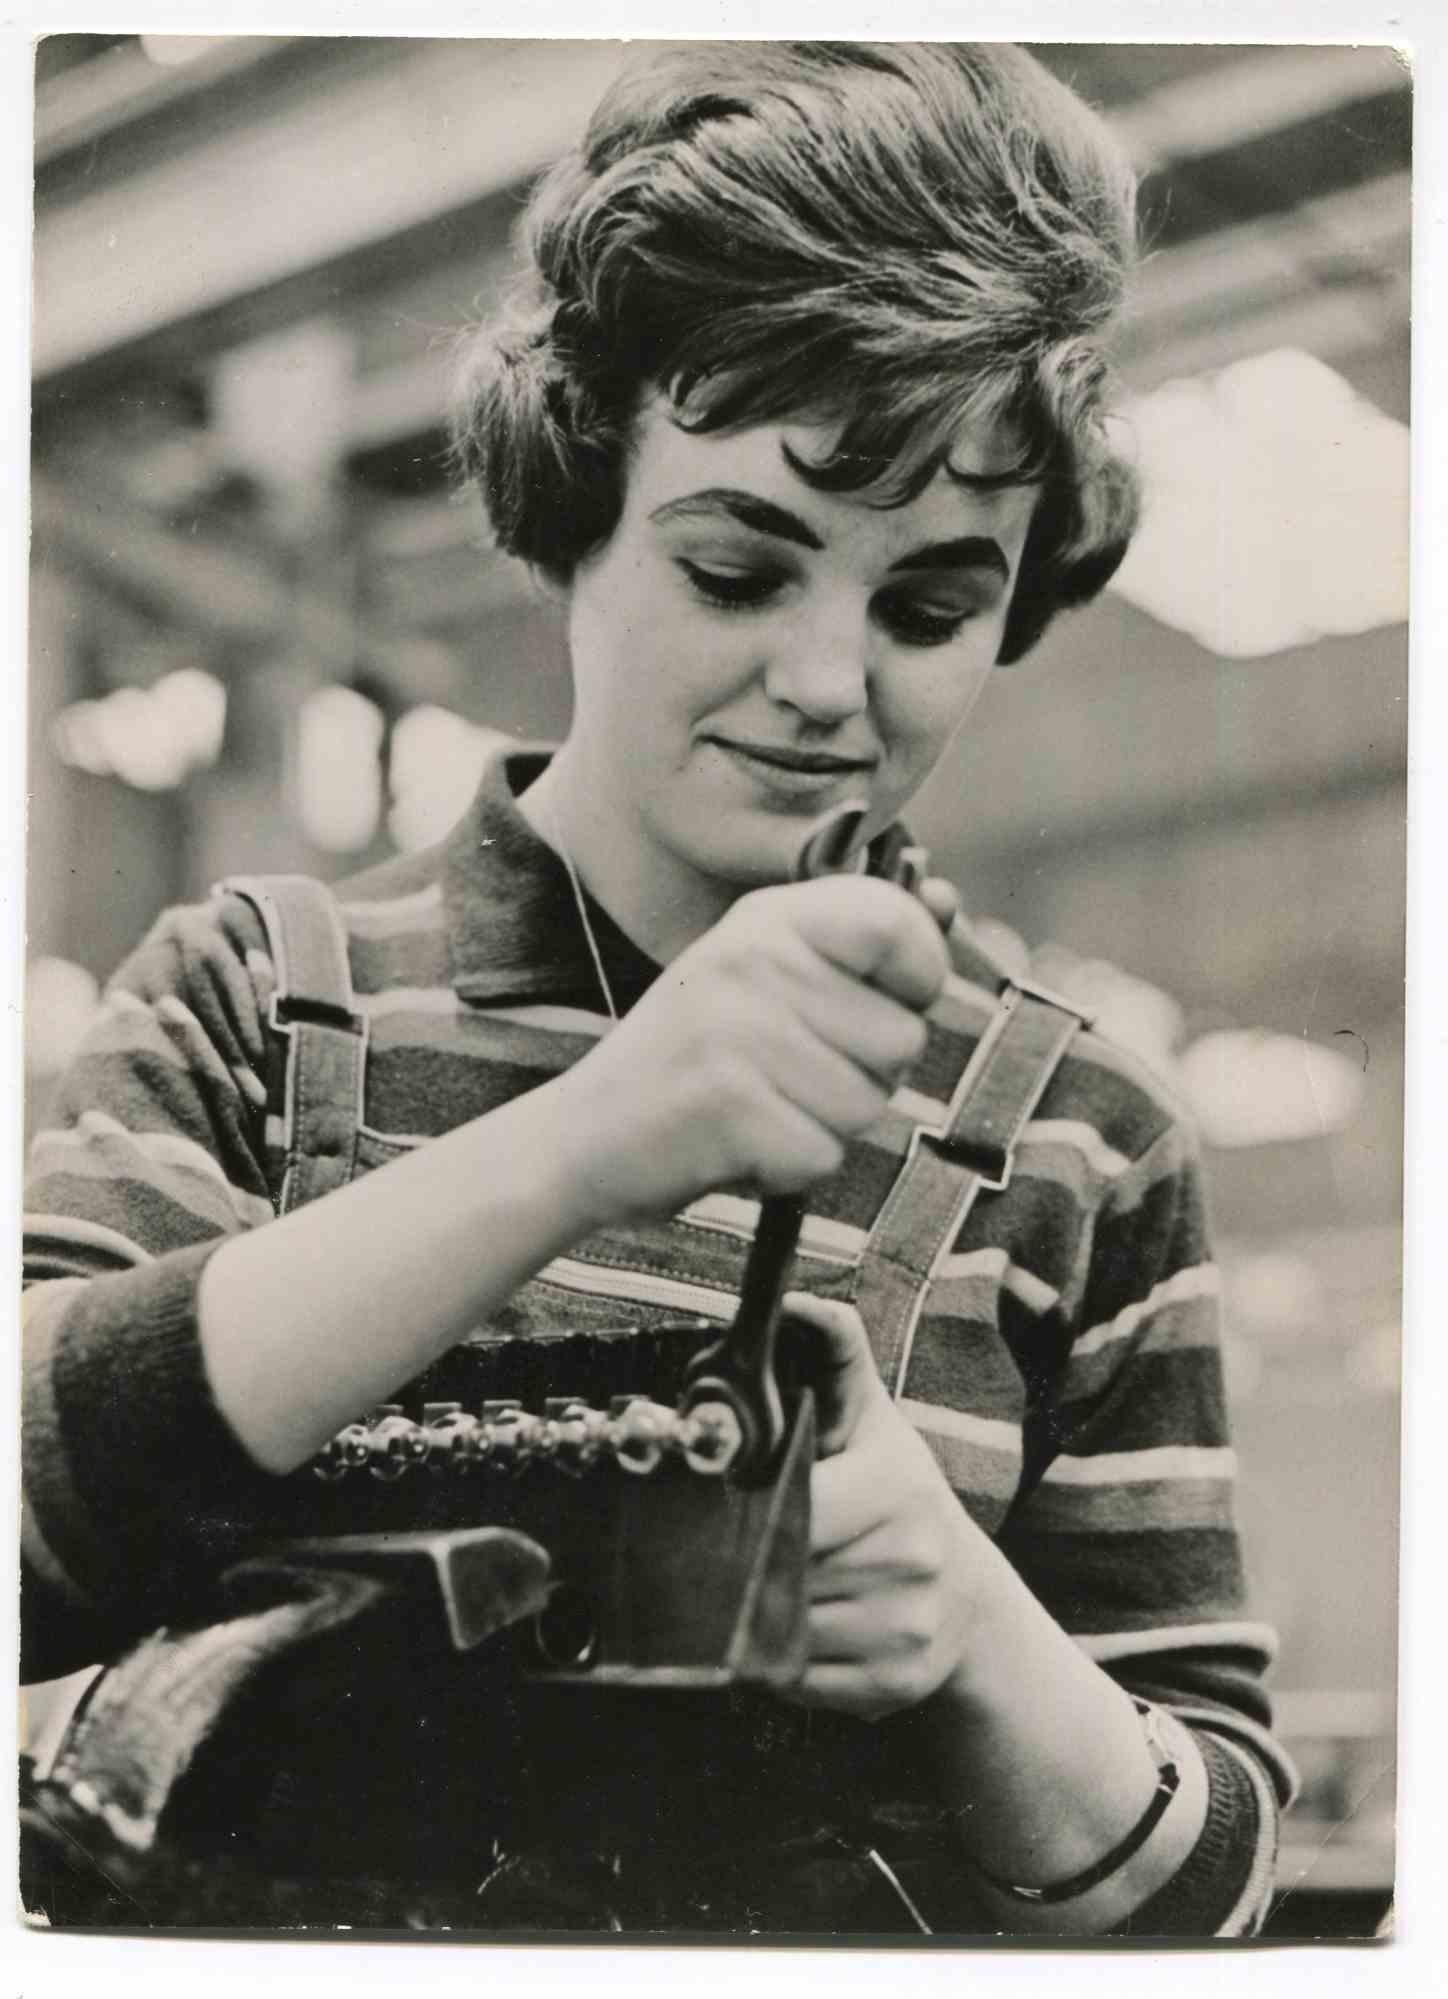 Women at Work - Historical Photograph About Women Rights - 1960s